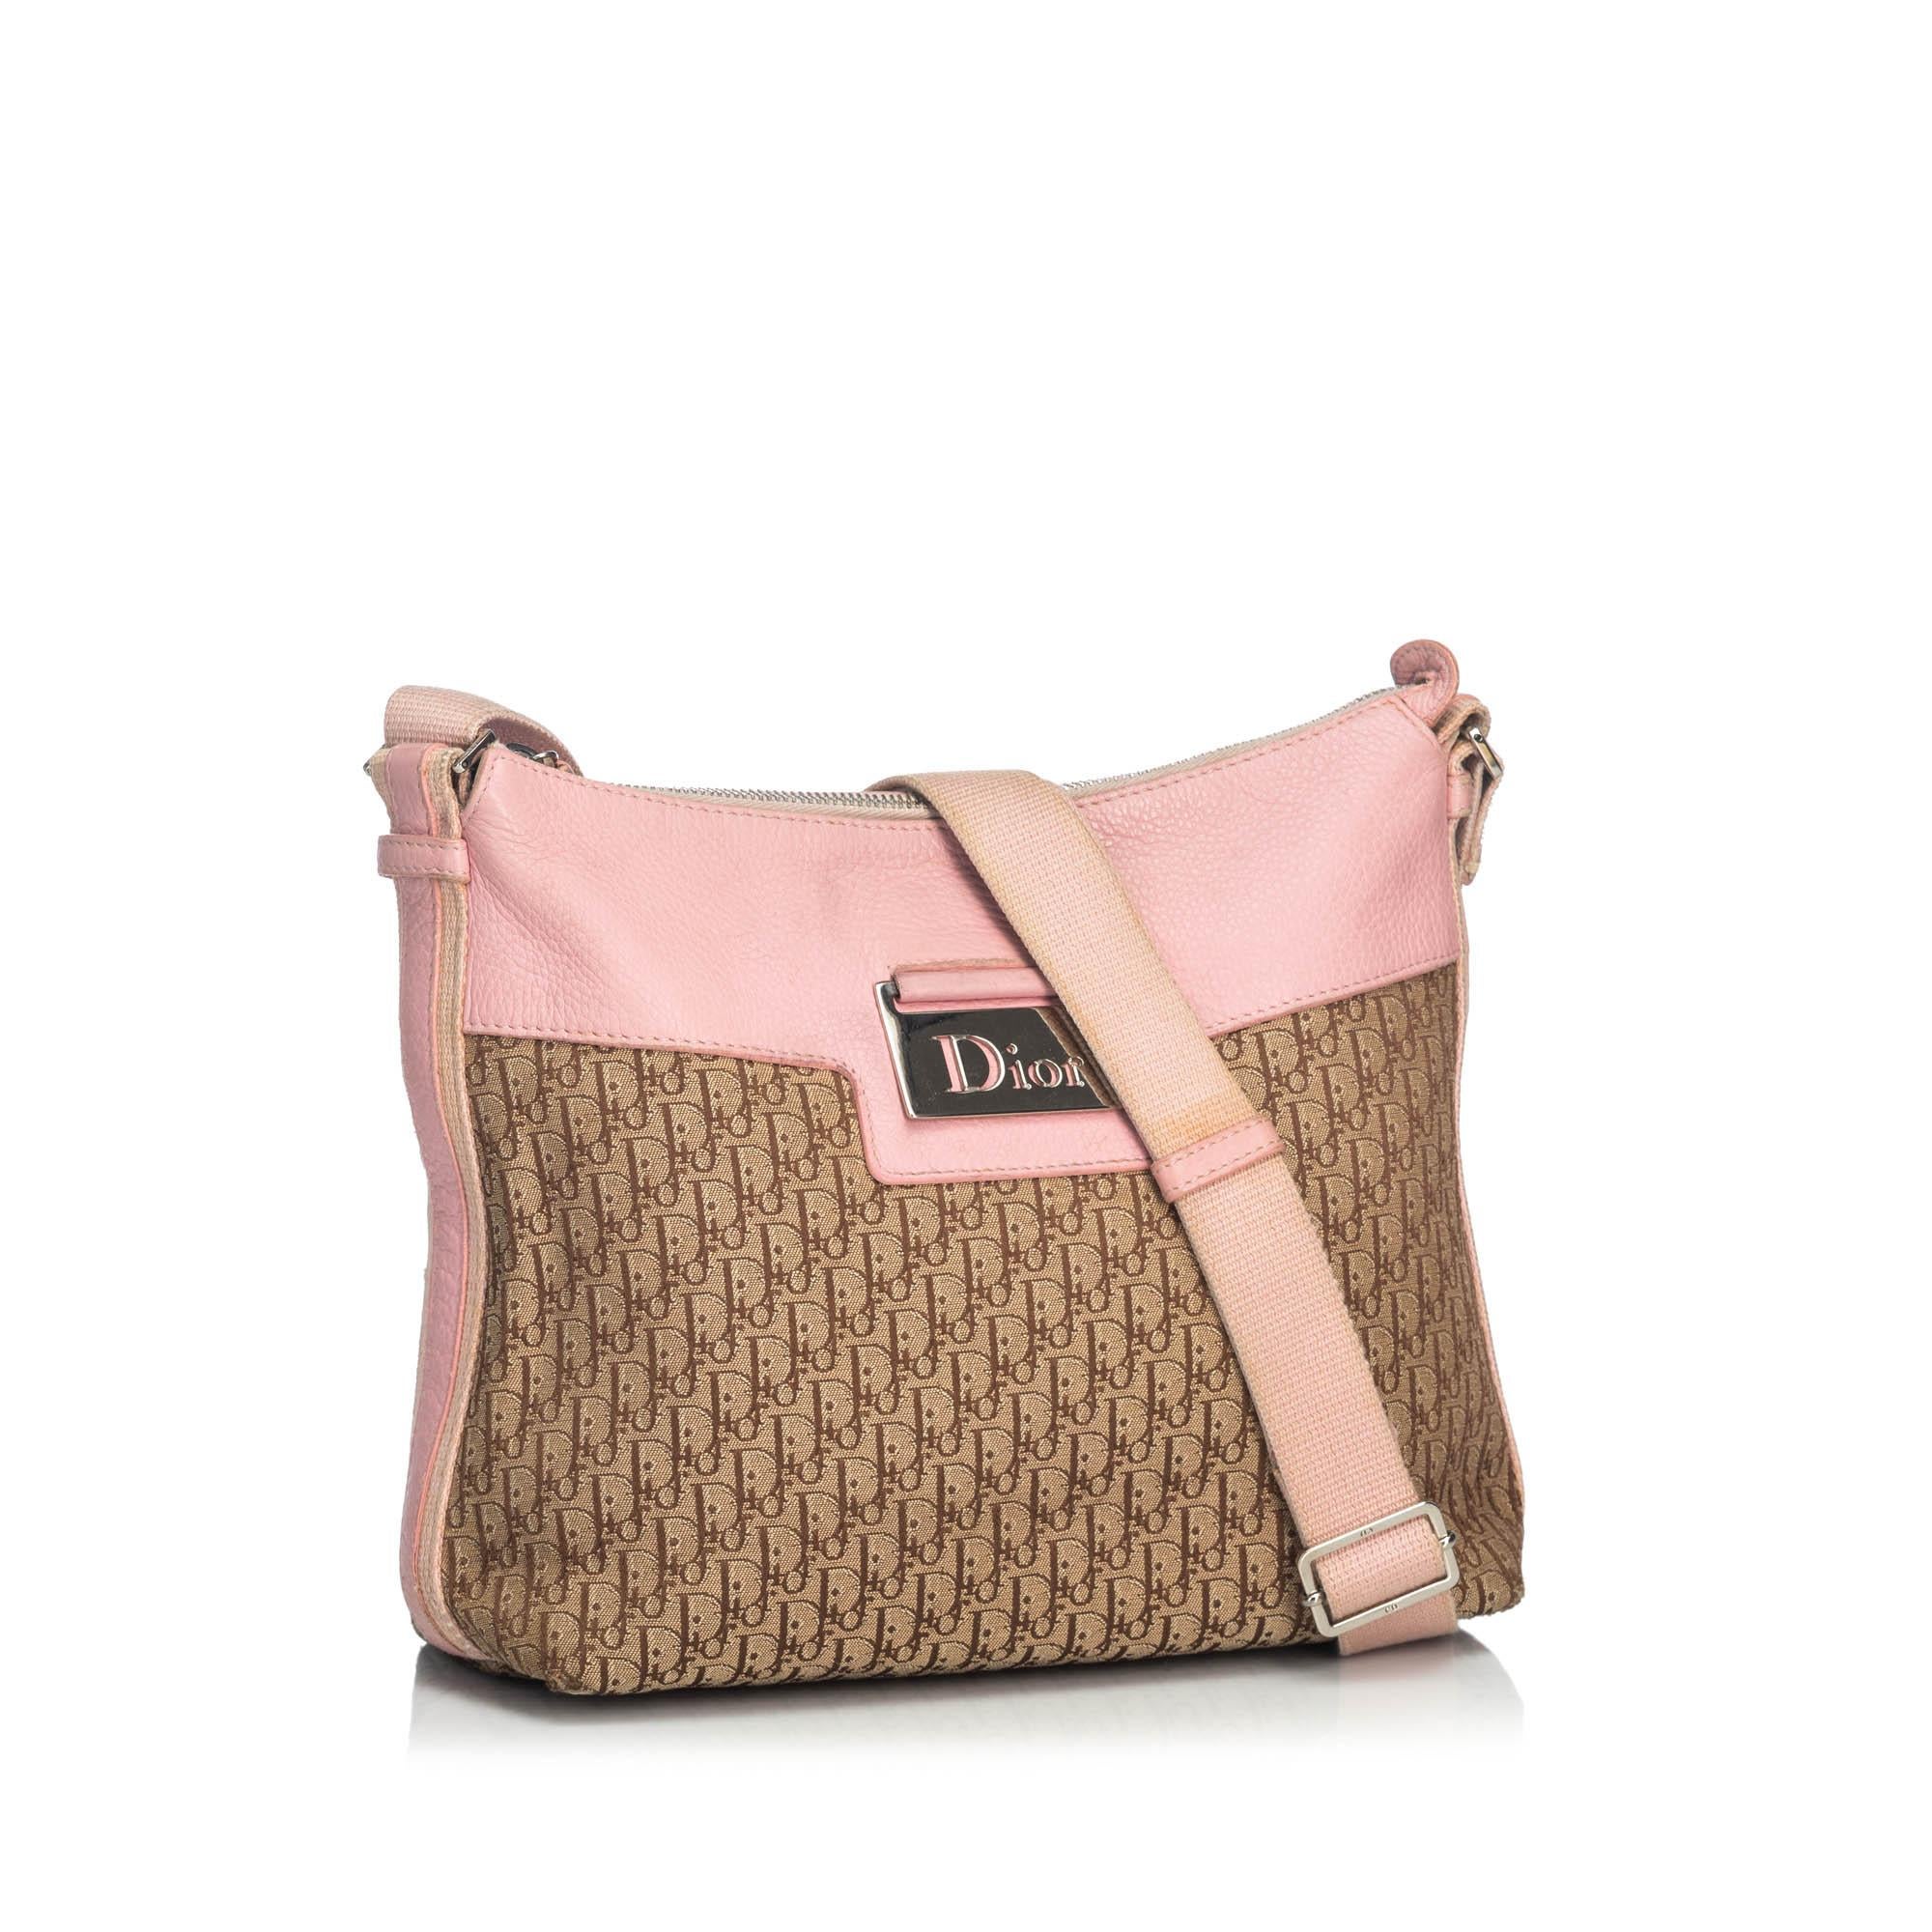 This crossbody bag features a canvas body with leather trim, a flat nylon strap, a top zip closure, and an interior zip pocket. It carries as B+ condition rating.

Inclusions: 
This item does not come with inclusions.

Dimensions:
Length: 22.00